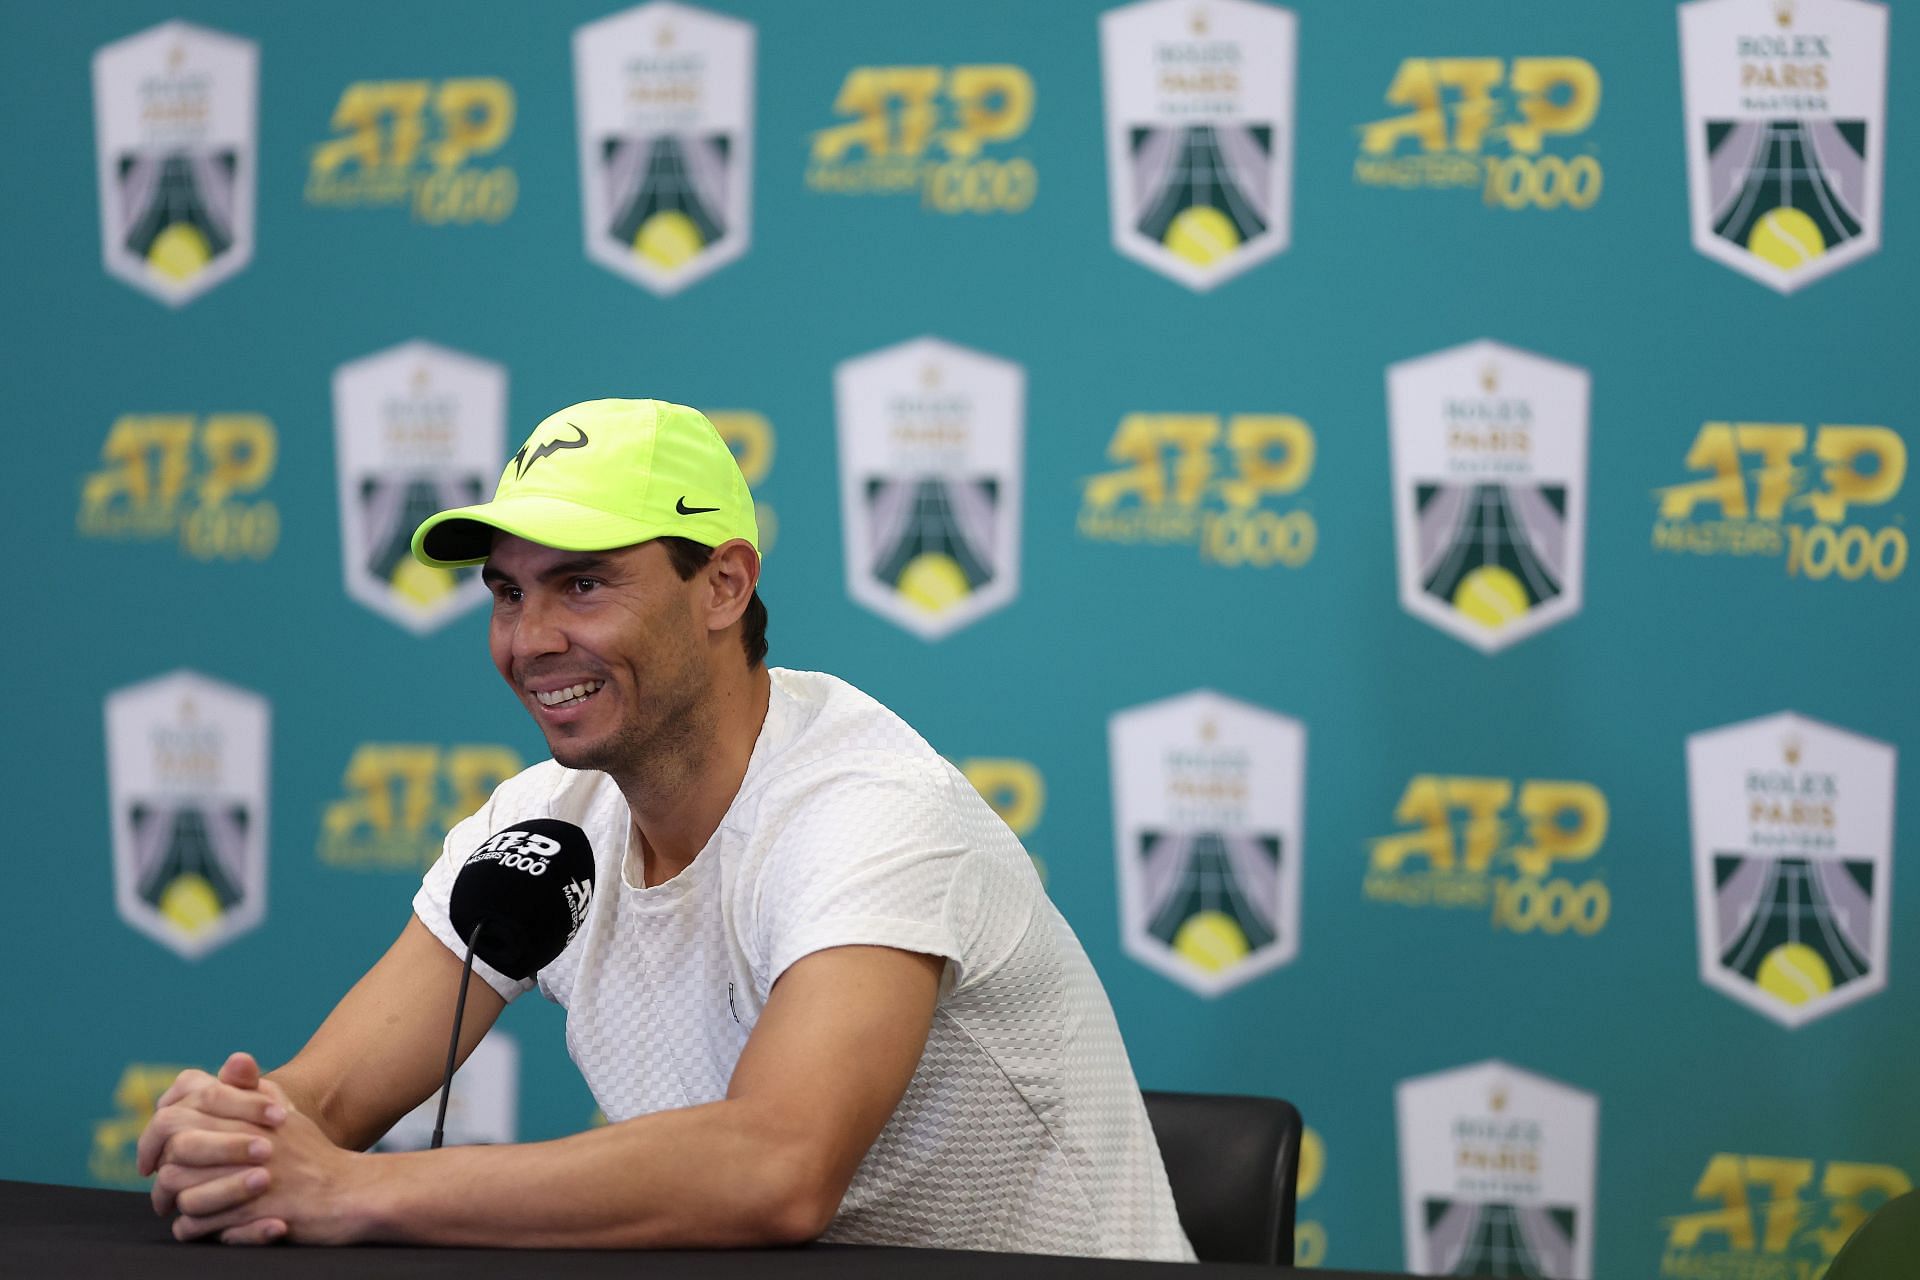 Nadal speaks to the press ahead of the Rolex Paris Masters 2022